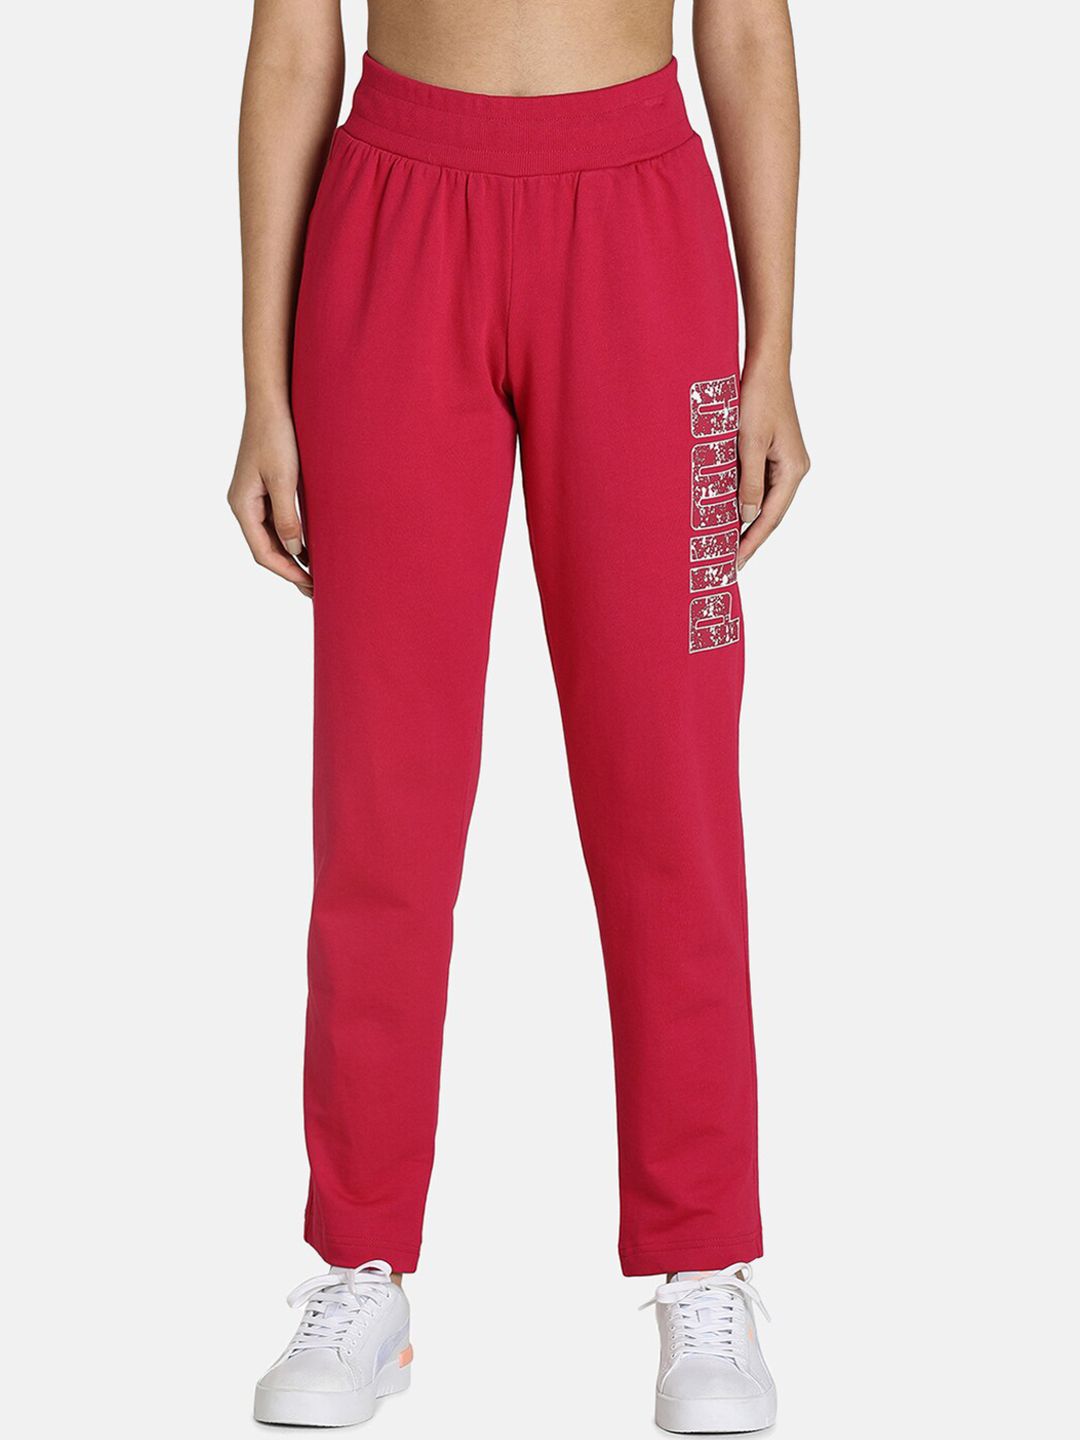 Puma Women Pink Solid Cotton Track Pant Price in India